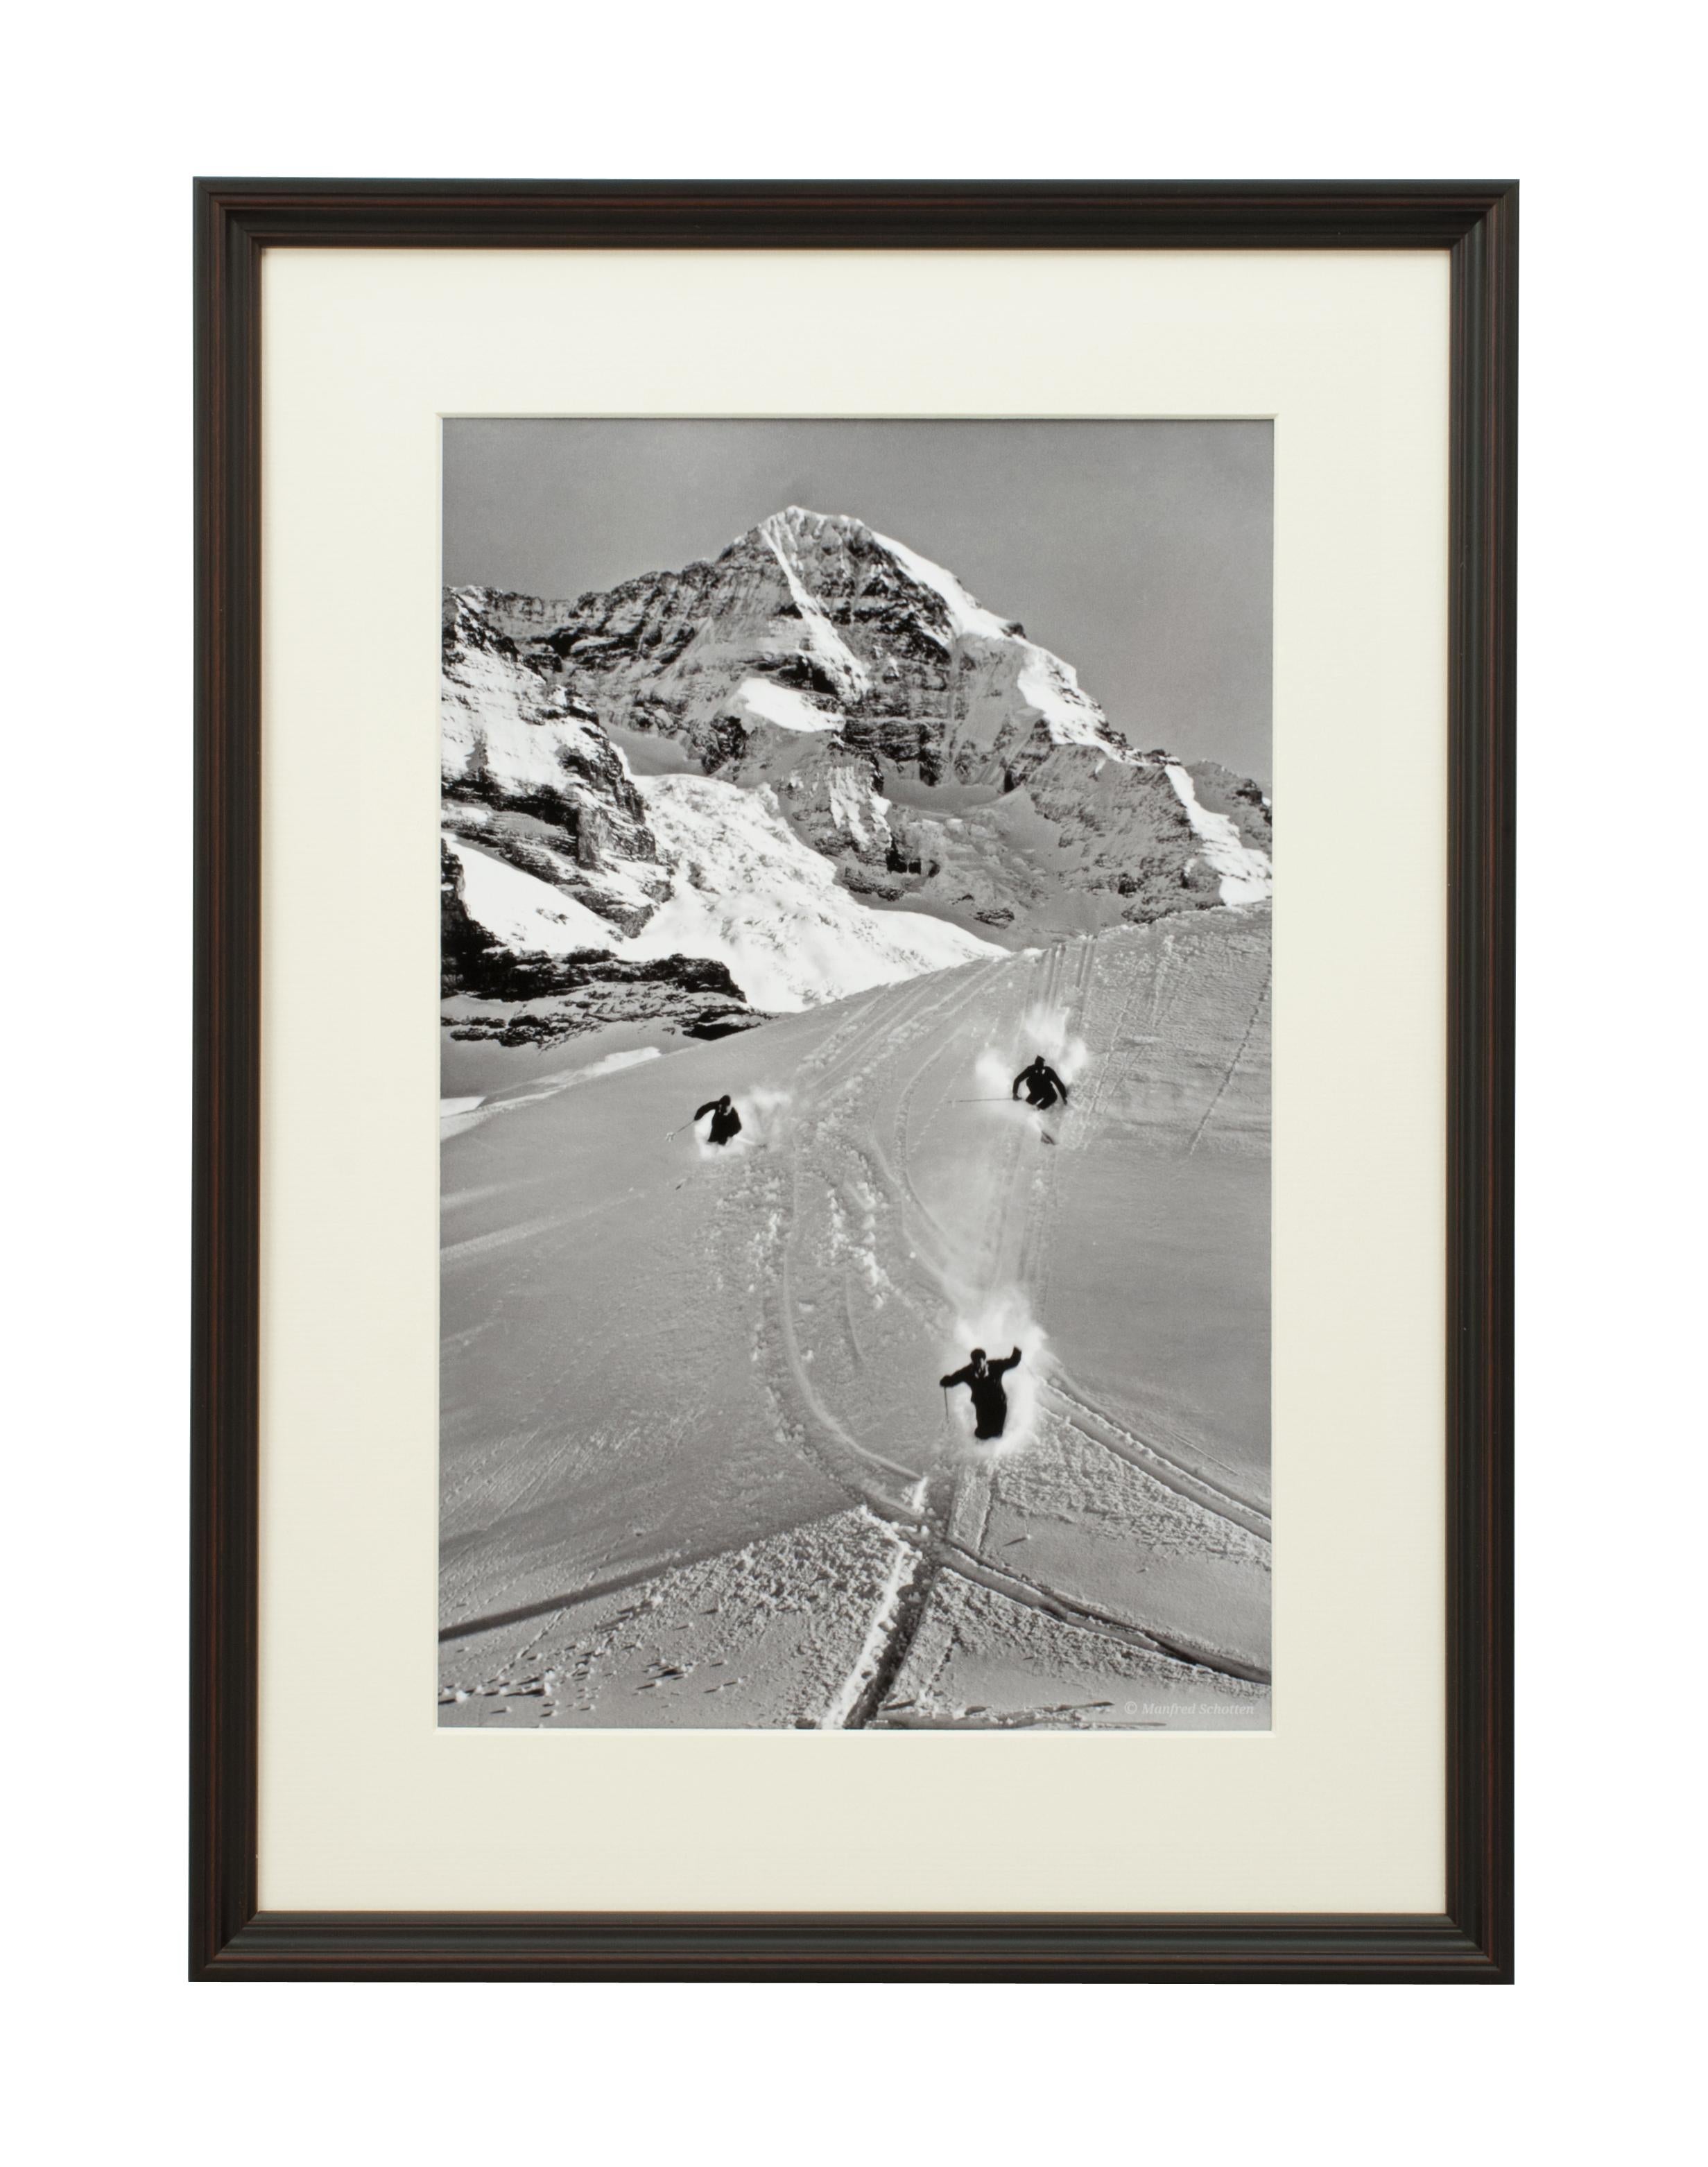 Vintage Style Ski Photography, Framed Alpine Ski Photograph, Scheidegg.
'SCHEIDEGG', a modern framed and mounted black and white photograph after an original 1930's skiing photograph. The frame is black with burgundy undercoat, the glazing is